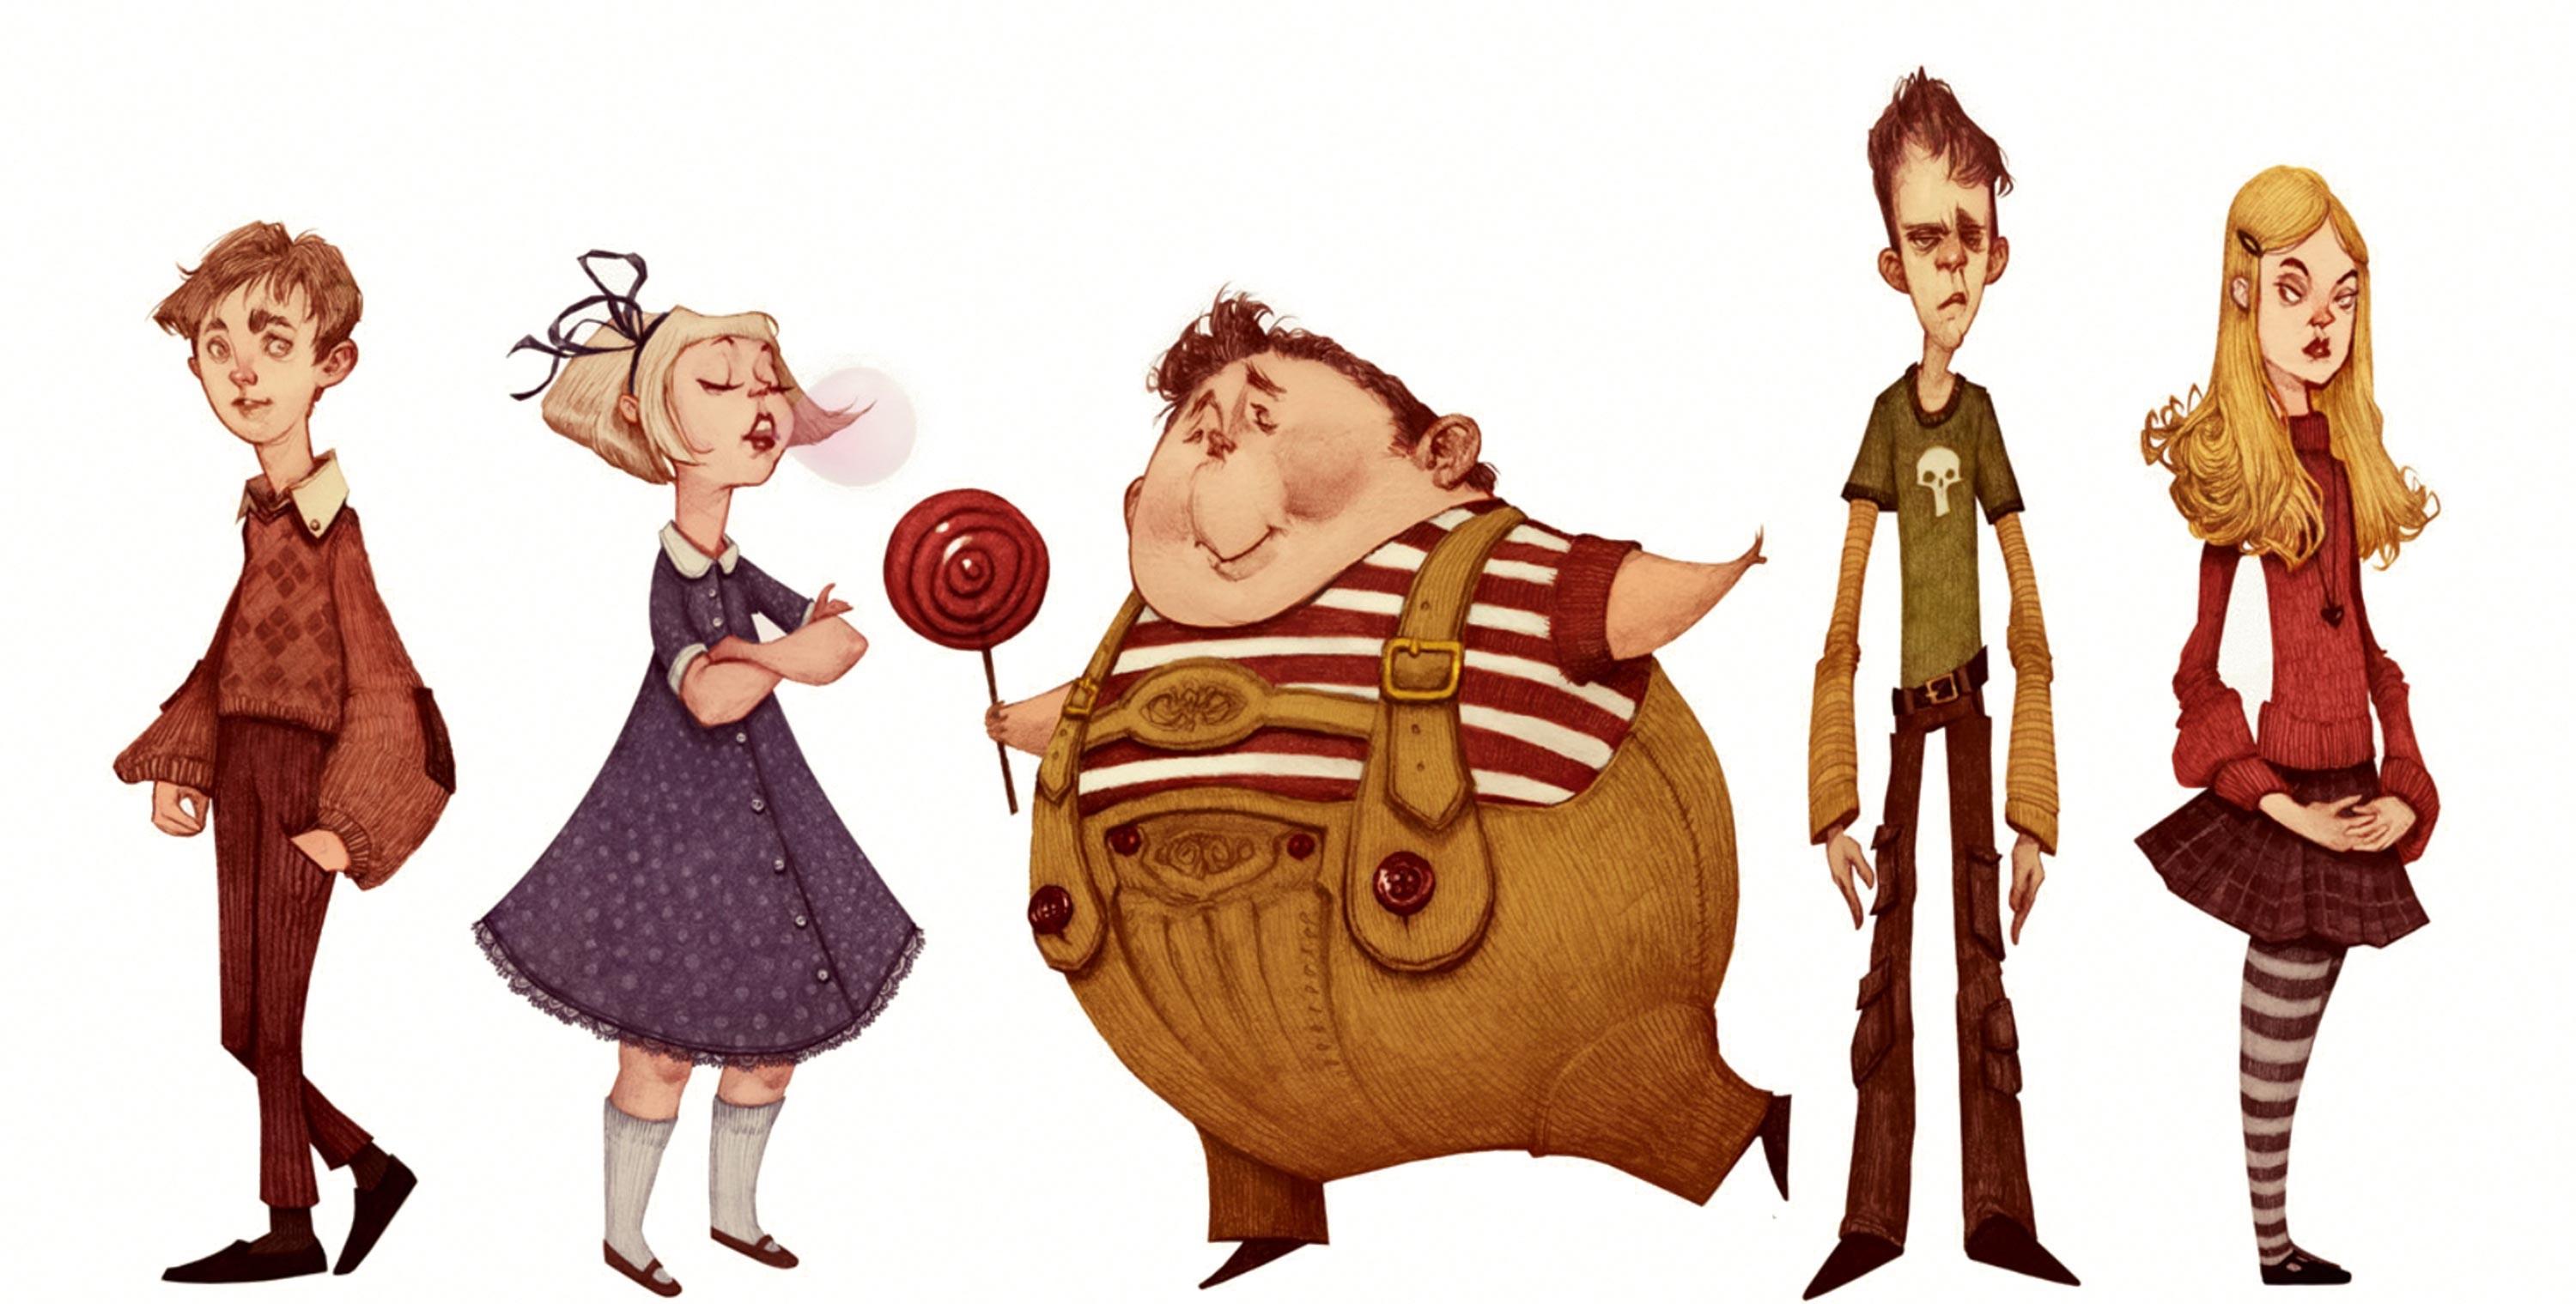 Original character designs for Charlie And The Chocolate Factory